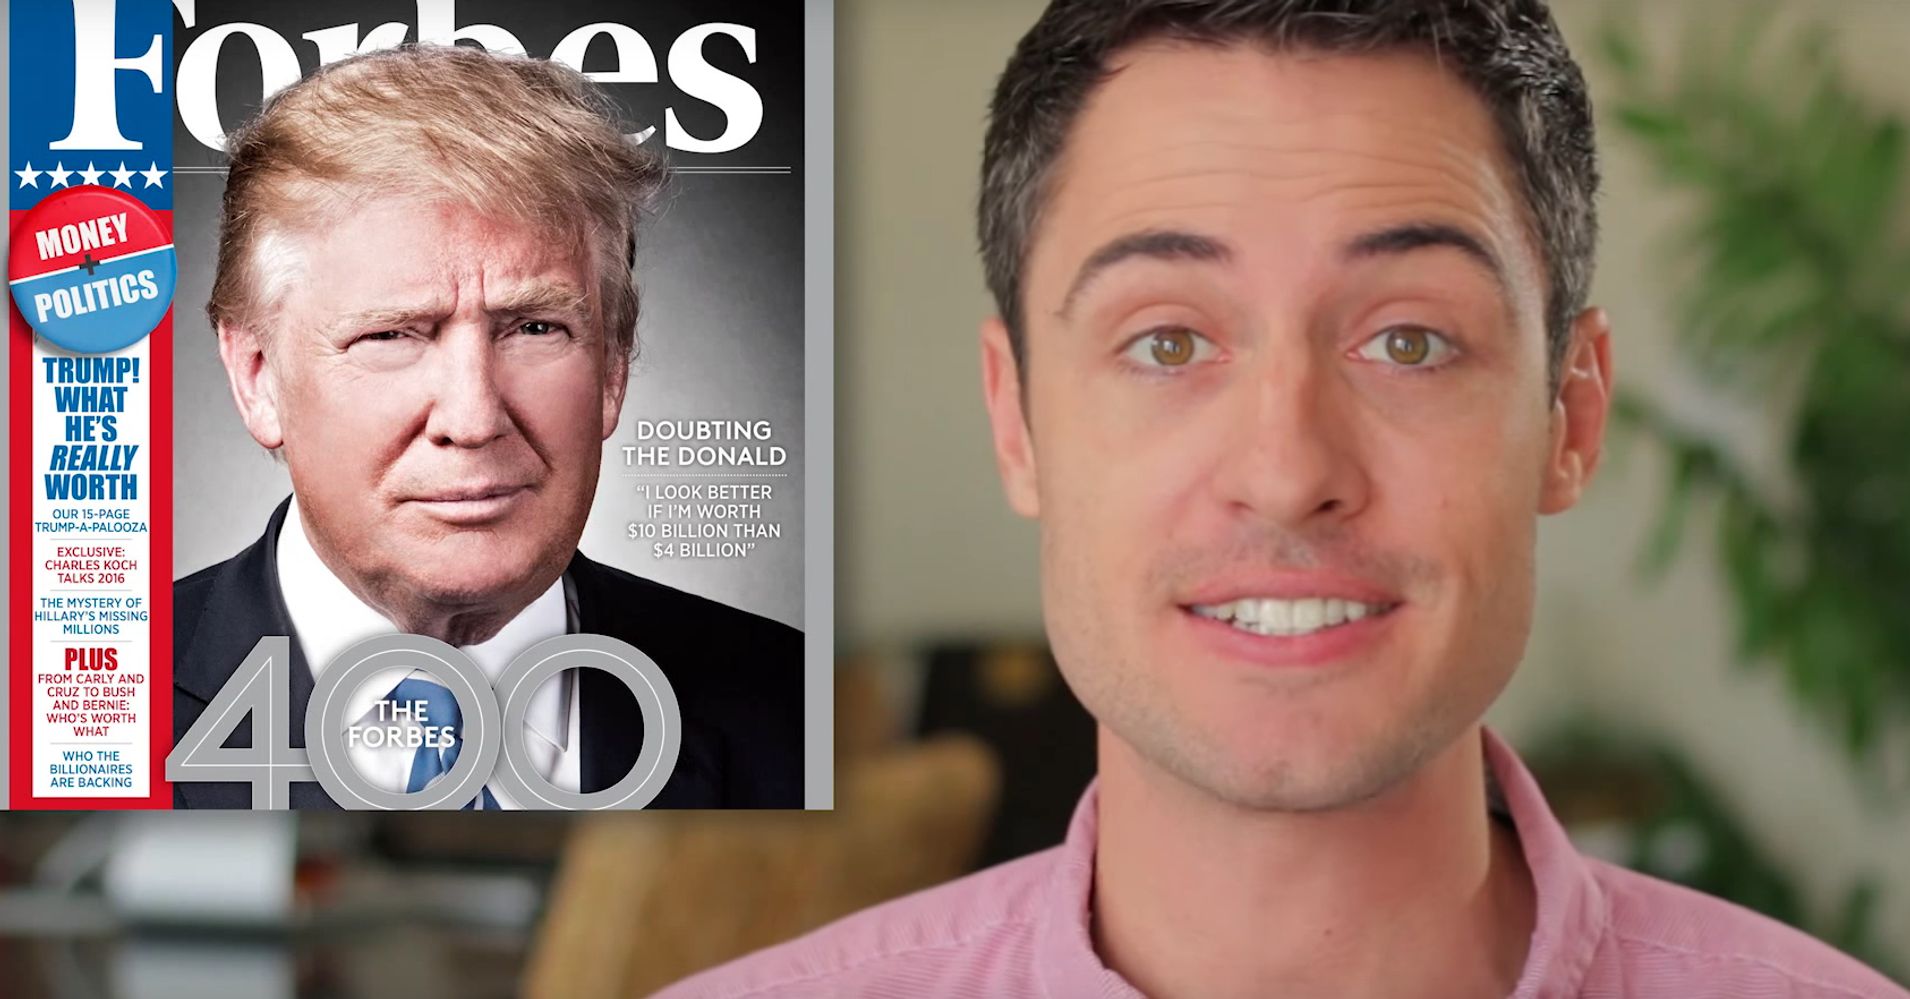 Gay Youtube Personality Comes Out In Support Of Donald Trump Huffpost 